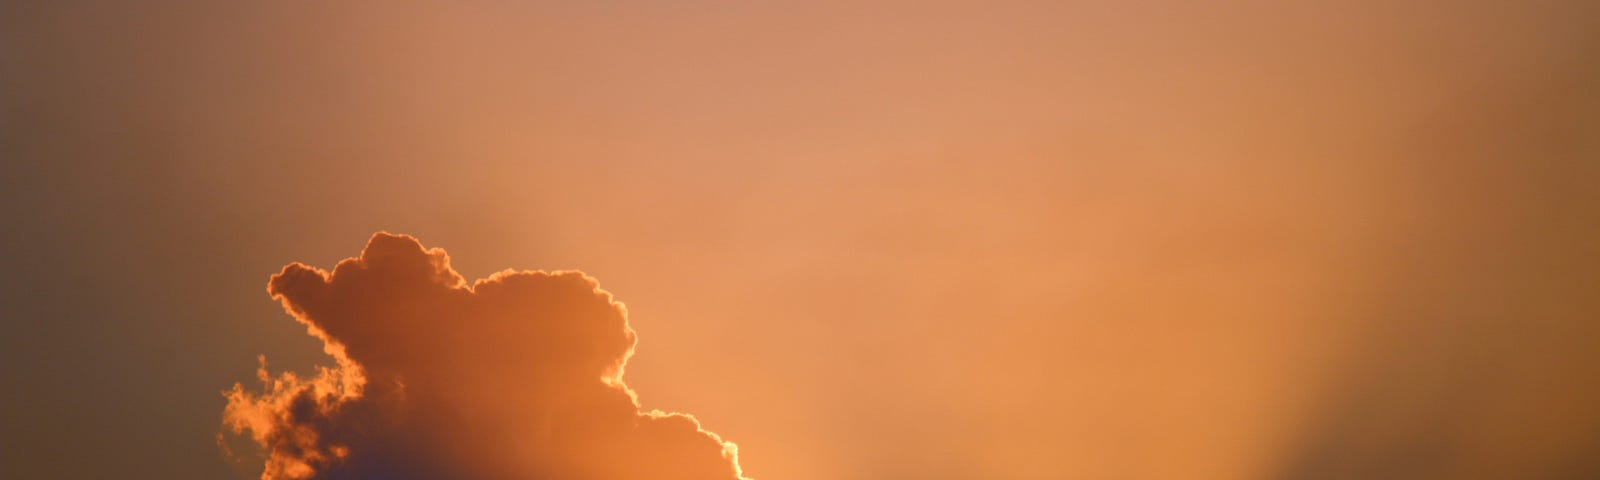 The image shows a beautiful sunset with the sun’s rays peeking through dark clouds, casting a warm, golden glow across the sky. This type of imagery symbolizes hope and serenity emerging from darkness and turmoil. It visually represents the idea of maintaining inner peace and finding light even in challenging times.